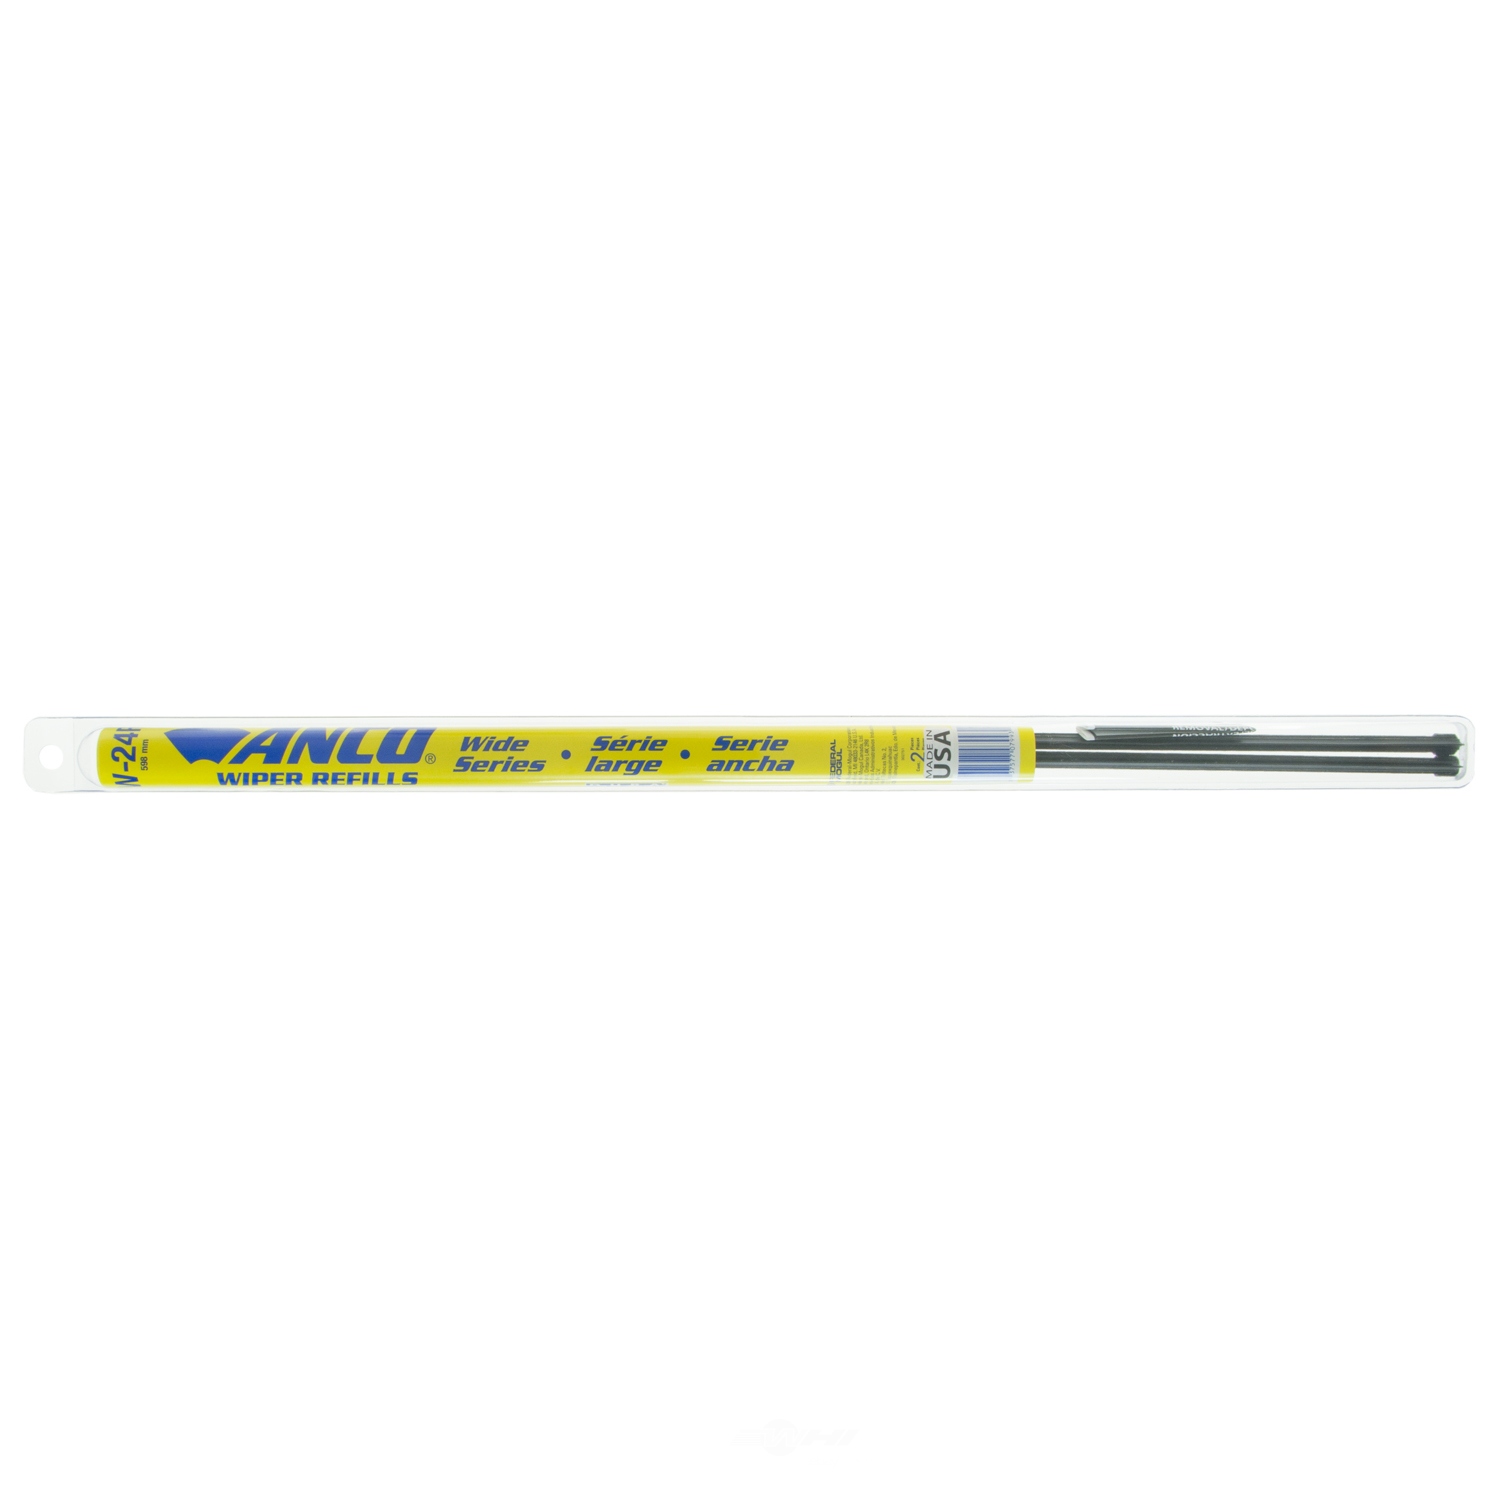 ANCO WIPER PRODUCTS - Wide Series Refills - ANC W-24R